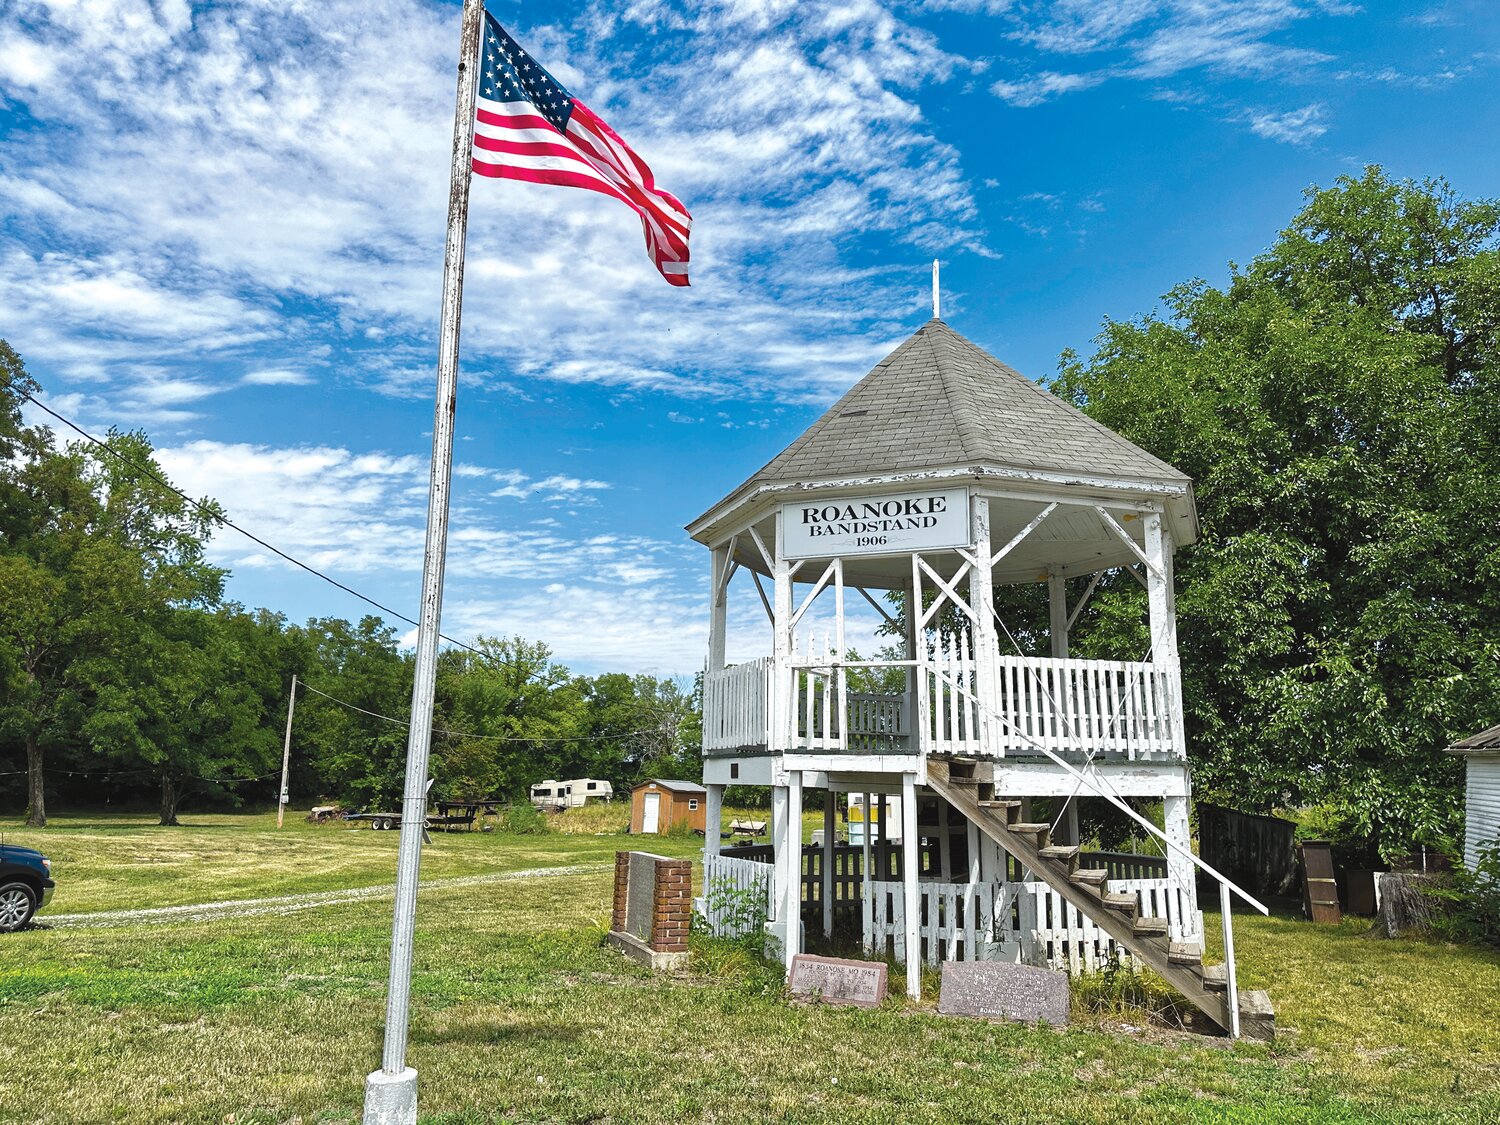 Ice cream, homemade cake, and bottled water will be sold prior to Saturday’s band concert to help fund preservation efforts for the 117-year-old bandstand.